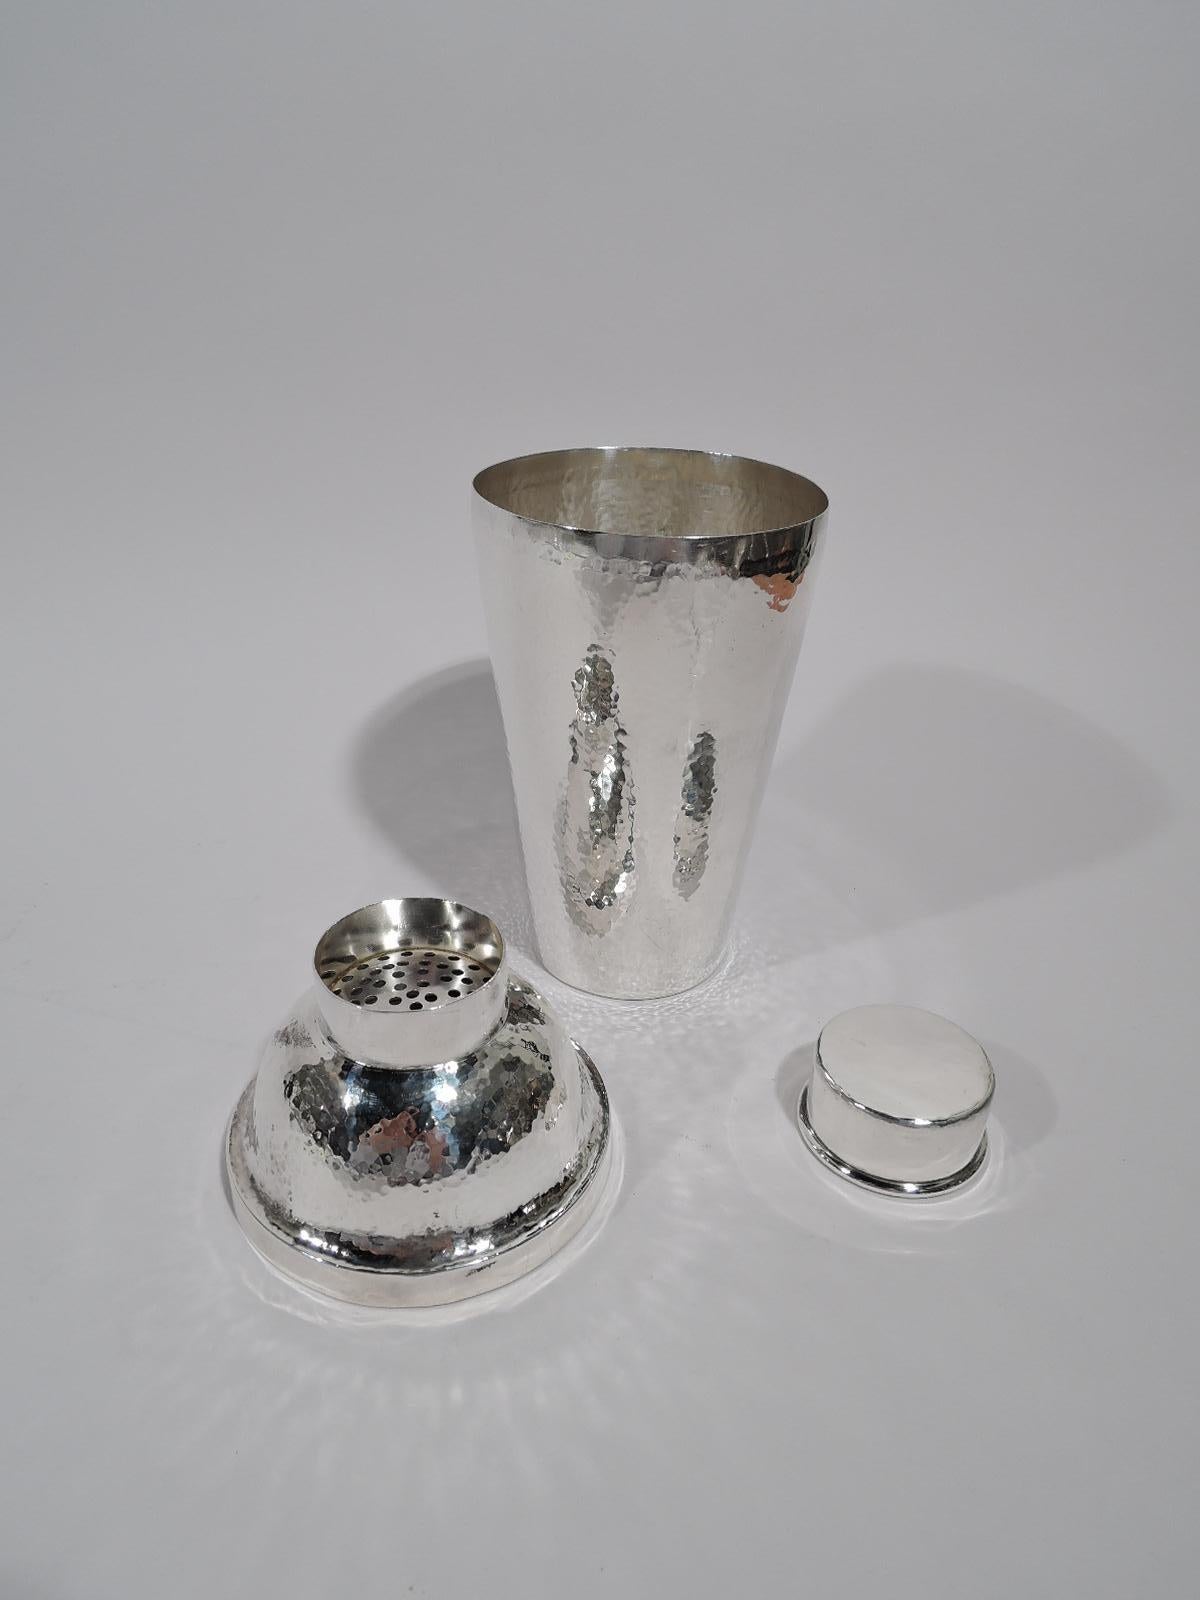 Turn of the century sterling silver cocktail shaker. Made by Unger Bros in Newark. Tapering cup; domed cover with short inset neck and built-in strainer. Cap fits snuggly. Allover hand-hammering. A fine application of Craftsman principles to a